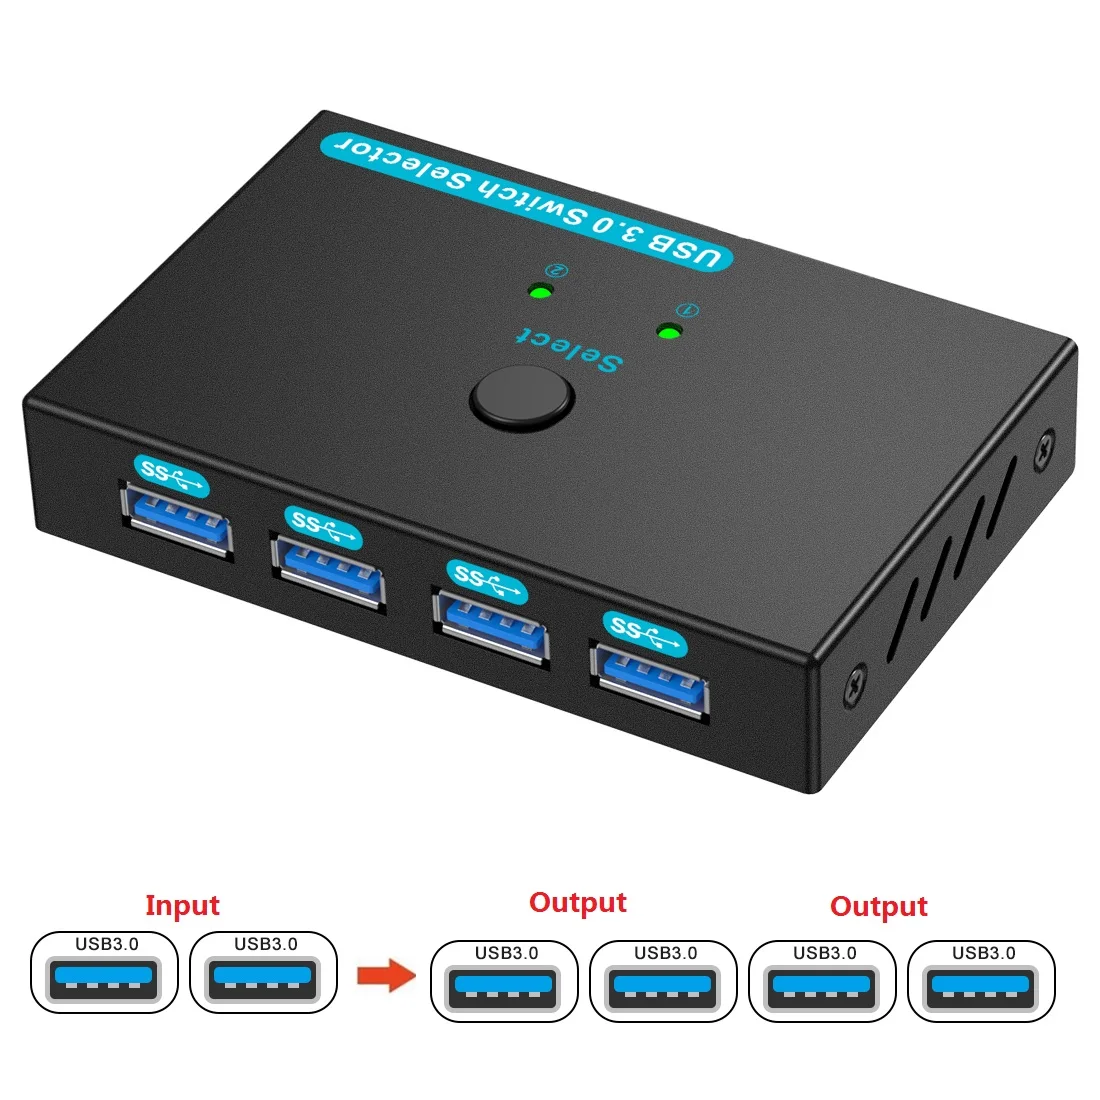 

SGEYR USB 3.0 Switch KM Switcher 2 Input 4 Output 2x4 USB Peripheral Switcher Box Hub for Mouse Keyboard Scanner Printer PC